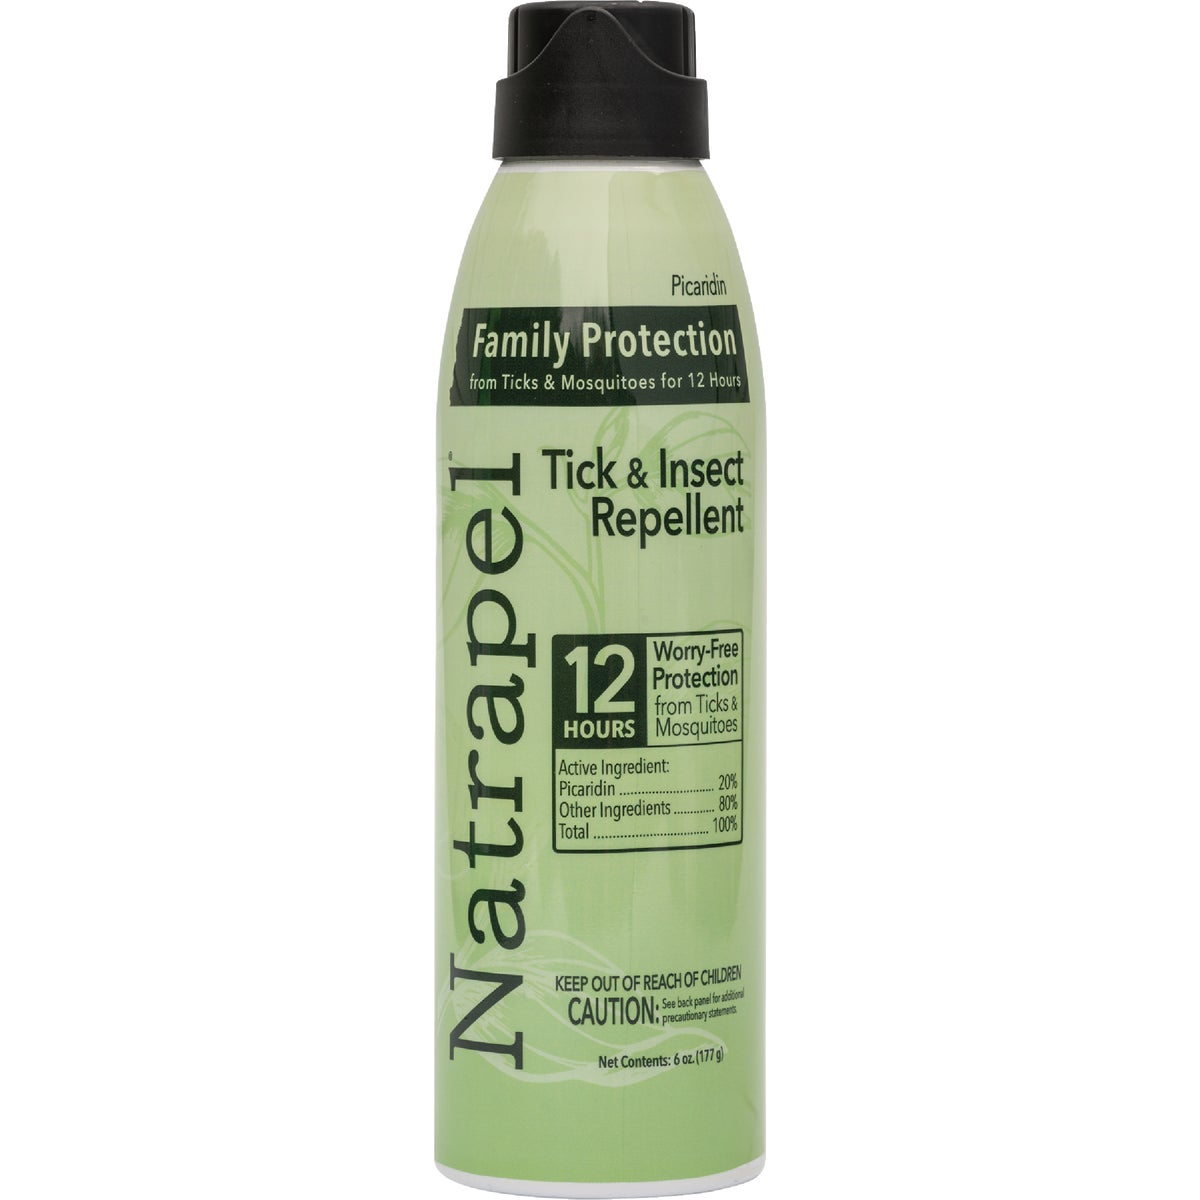 Item 702077, Non-Deet insect repellent for protection against biting insects and ticks.